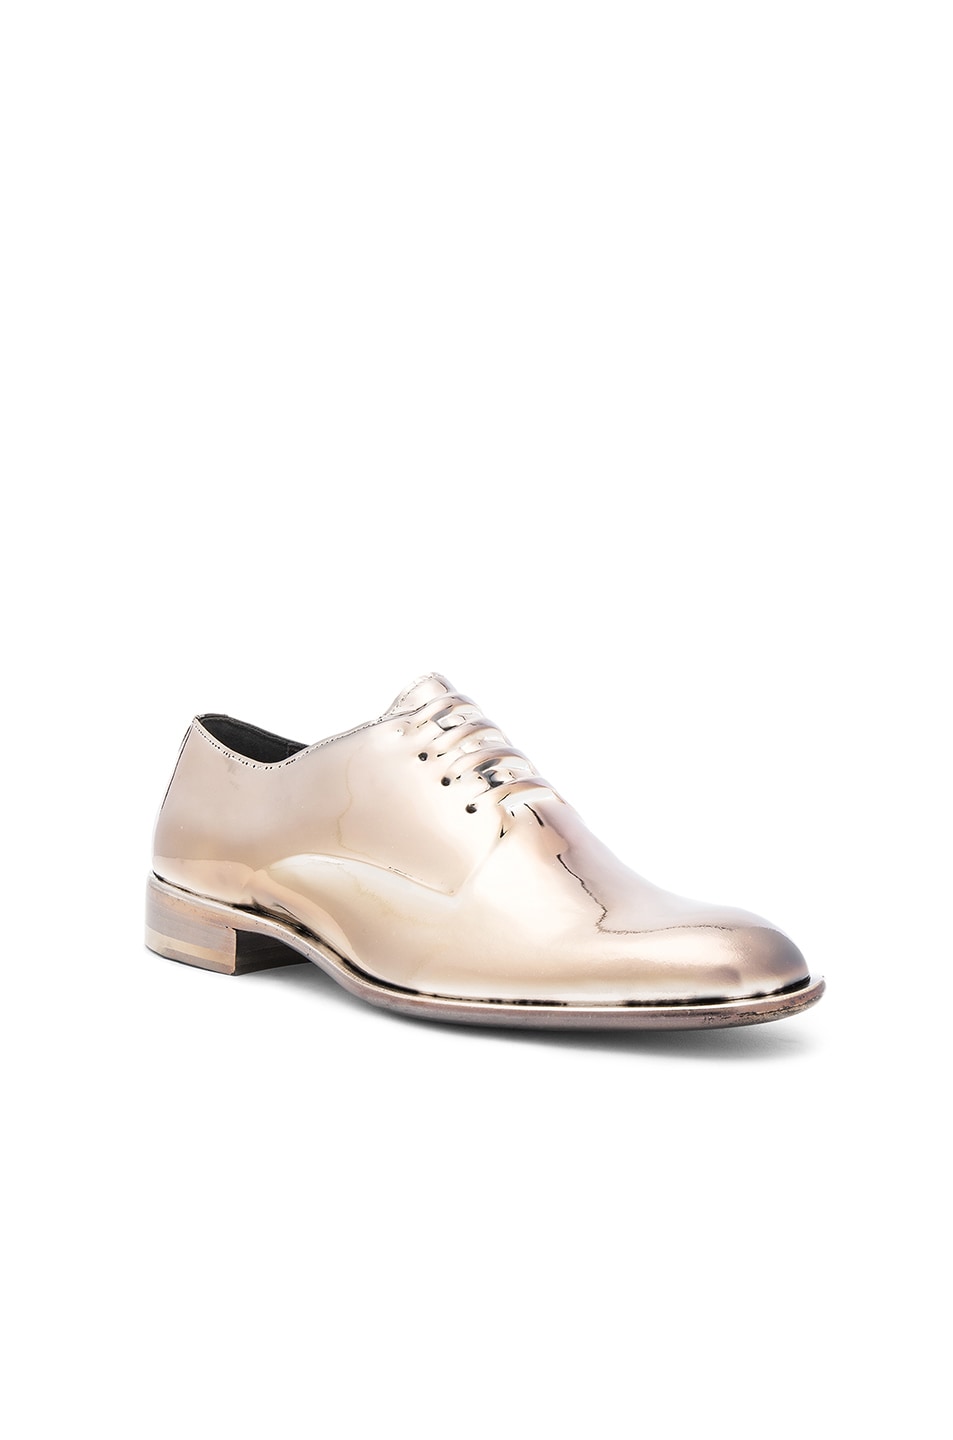 Image 1 of Maison Margiela Limited Edition Galvanized Effect Dress Shoes in Silver